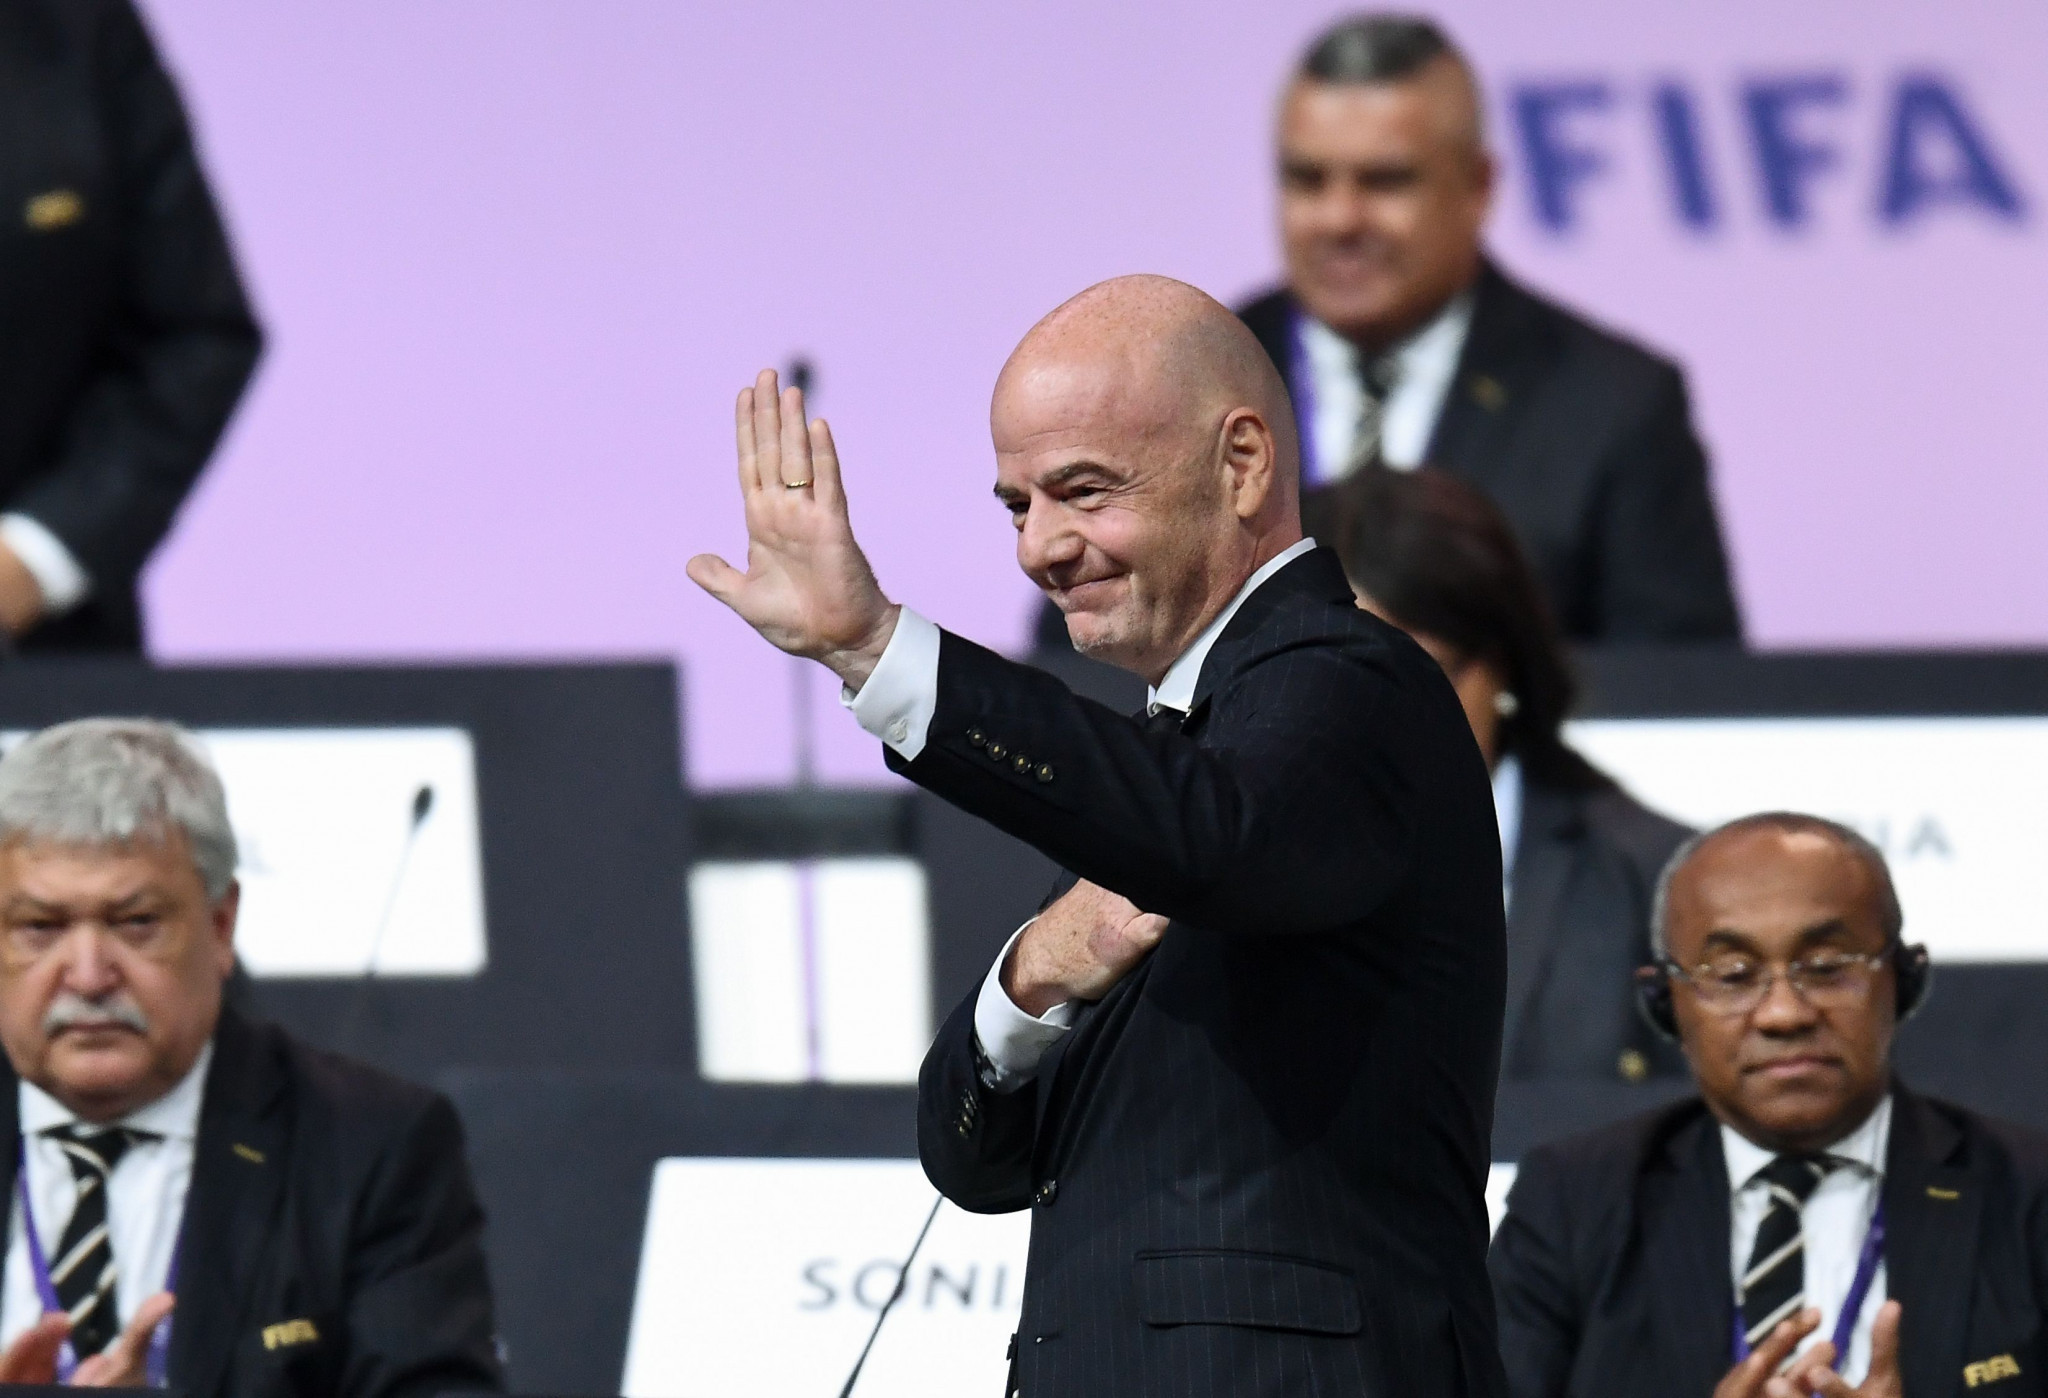 Gianni Infantino secured a further four-year term at the helm of FIFA by applause at the Congress ©Getty Images